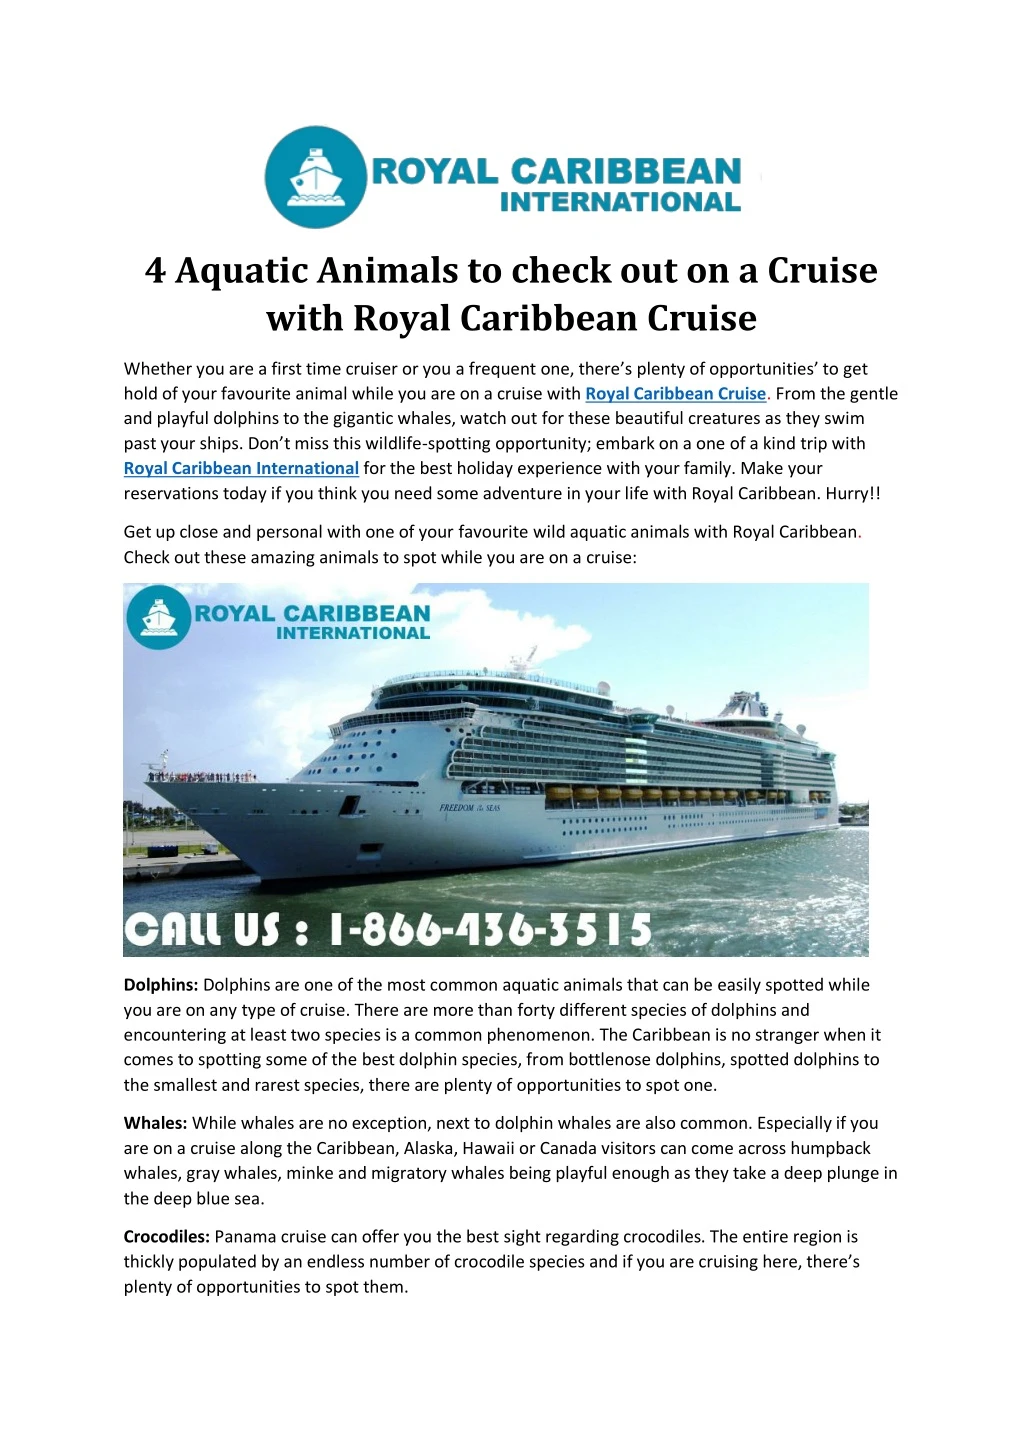 4 aquatic animals to check out on a cruise with